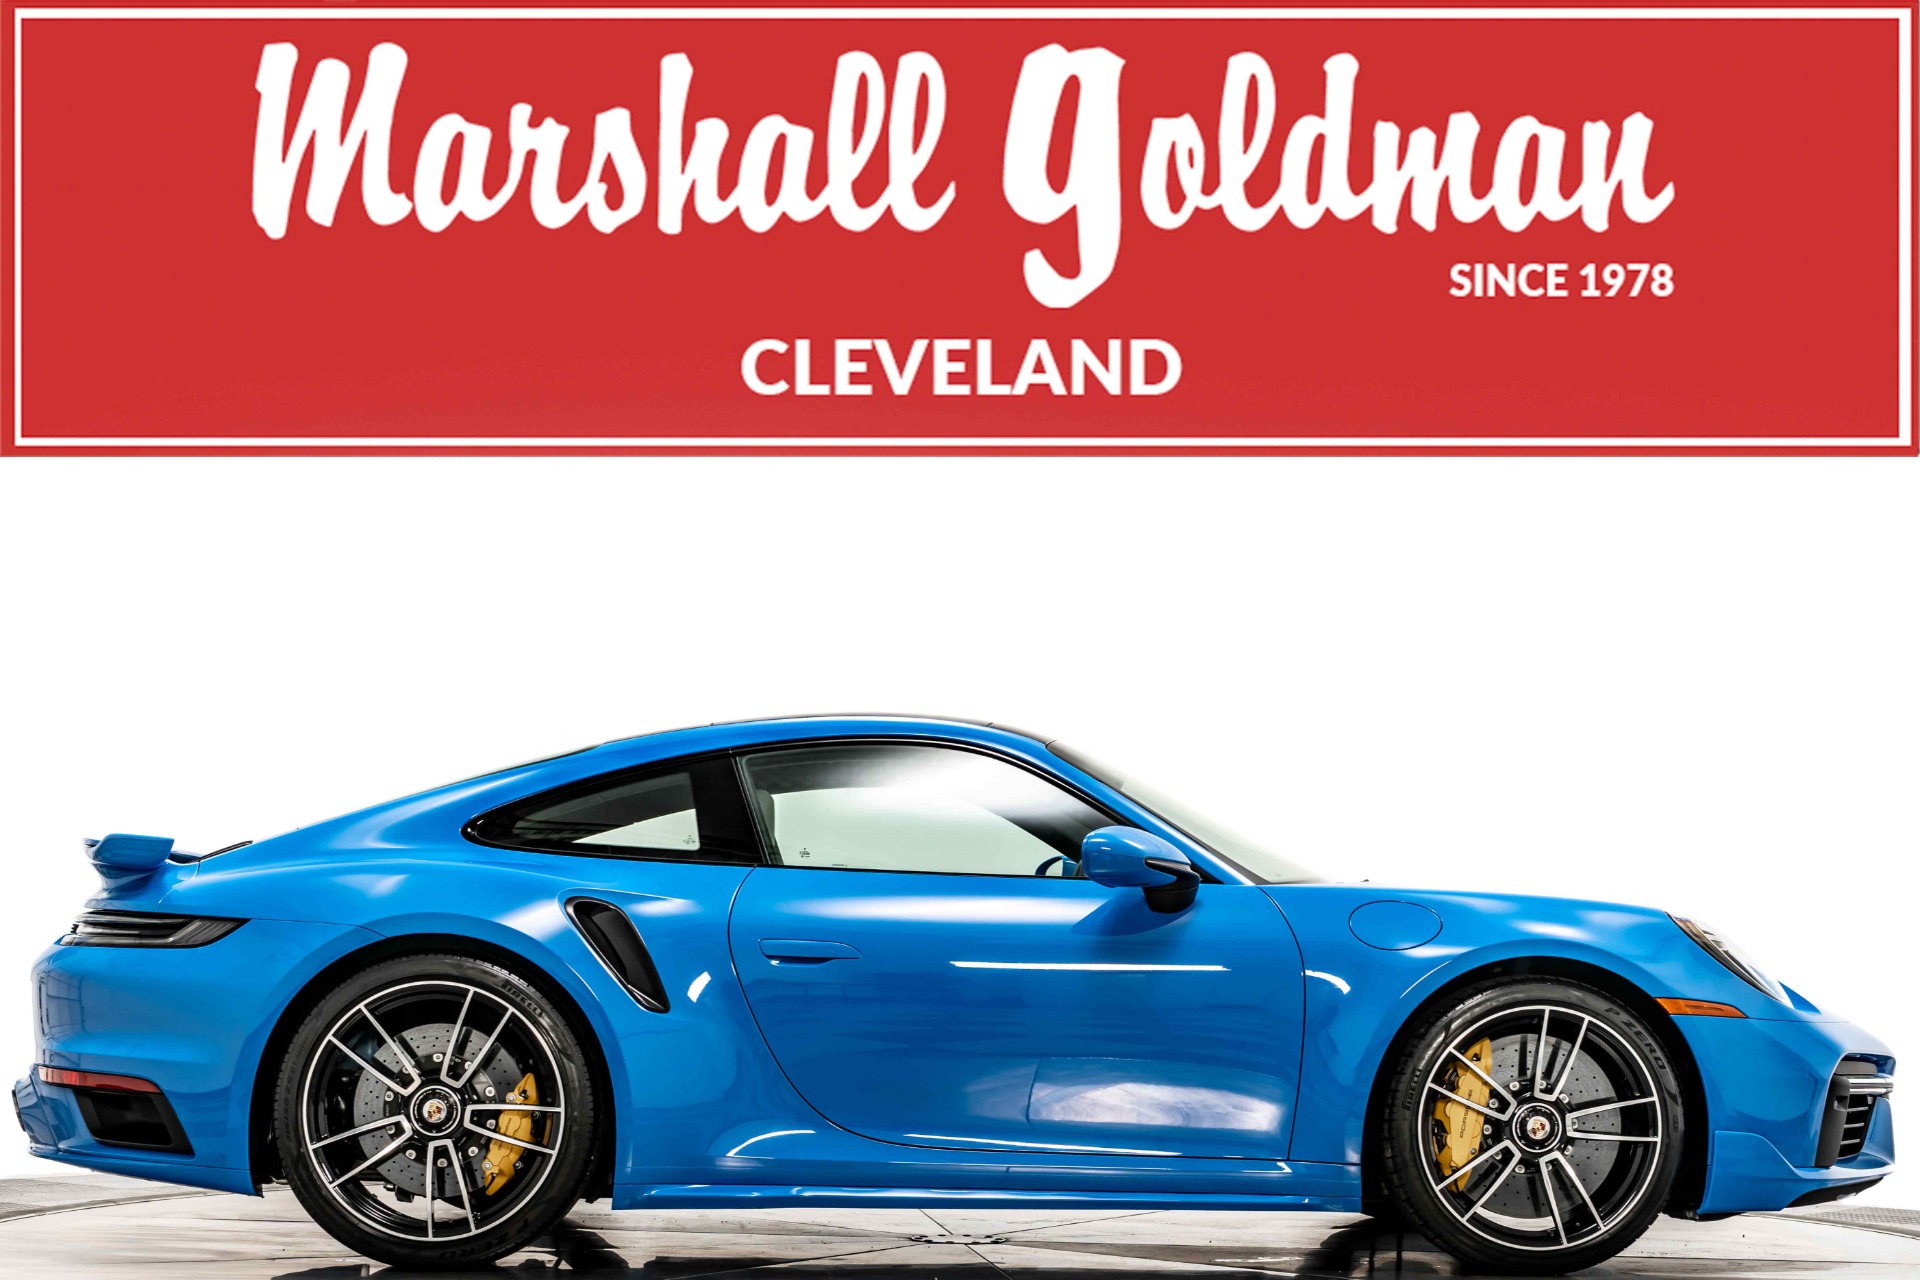 Used 2022 Porsche 911 Turbo S For Sale (Sold) | Marshall Goldman Cleveland  Stock #WWIWTLD